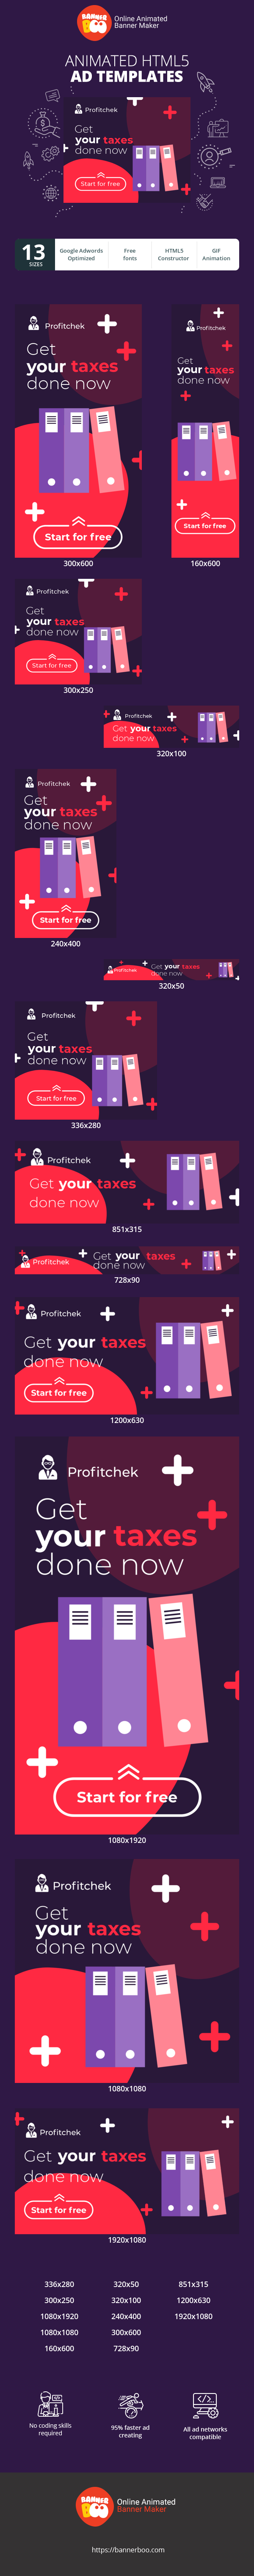 Banner ad template — Get Your Taxes Done Now — Accountant